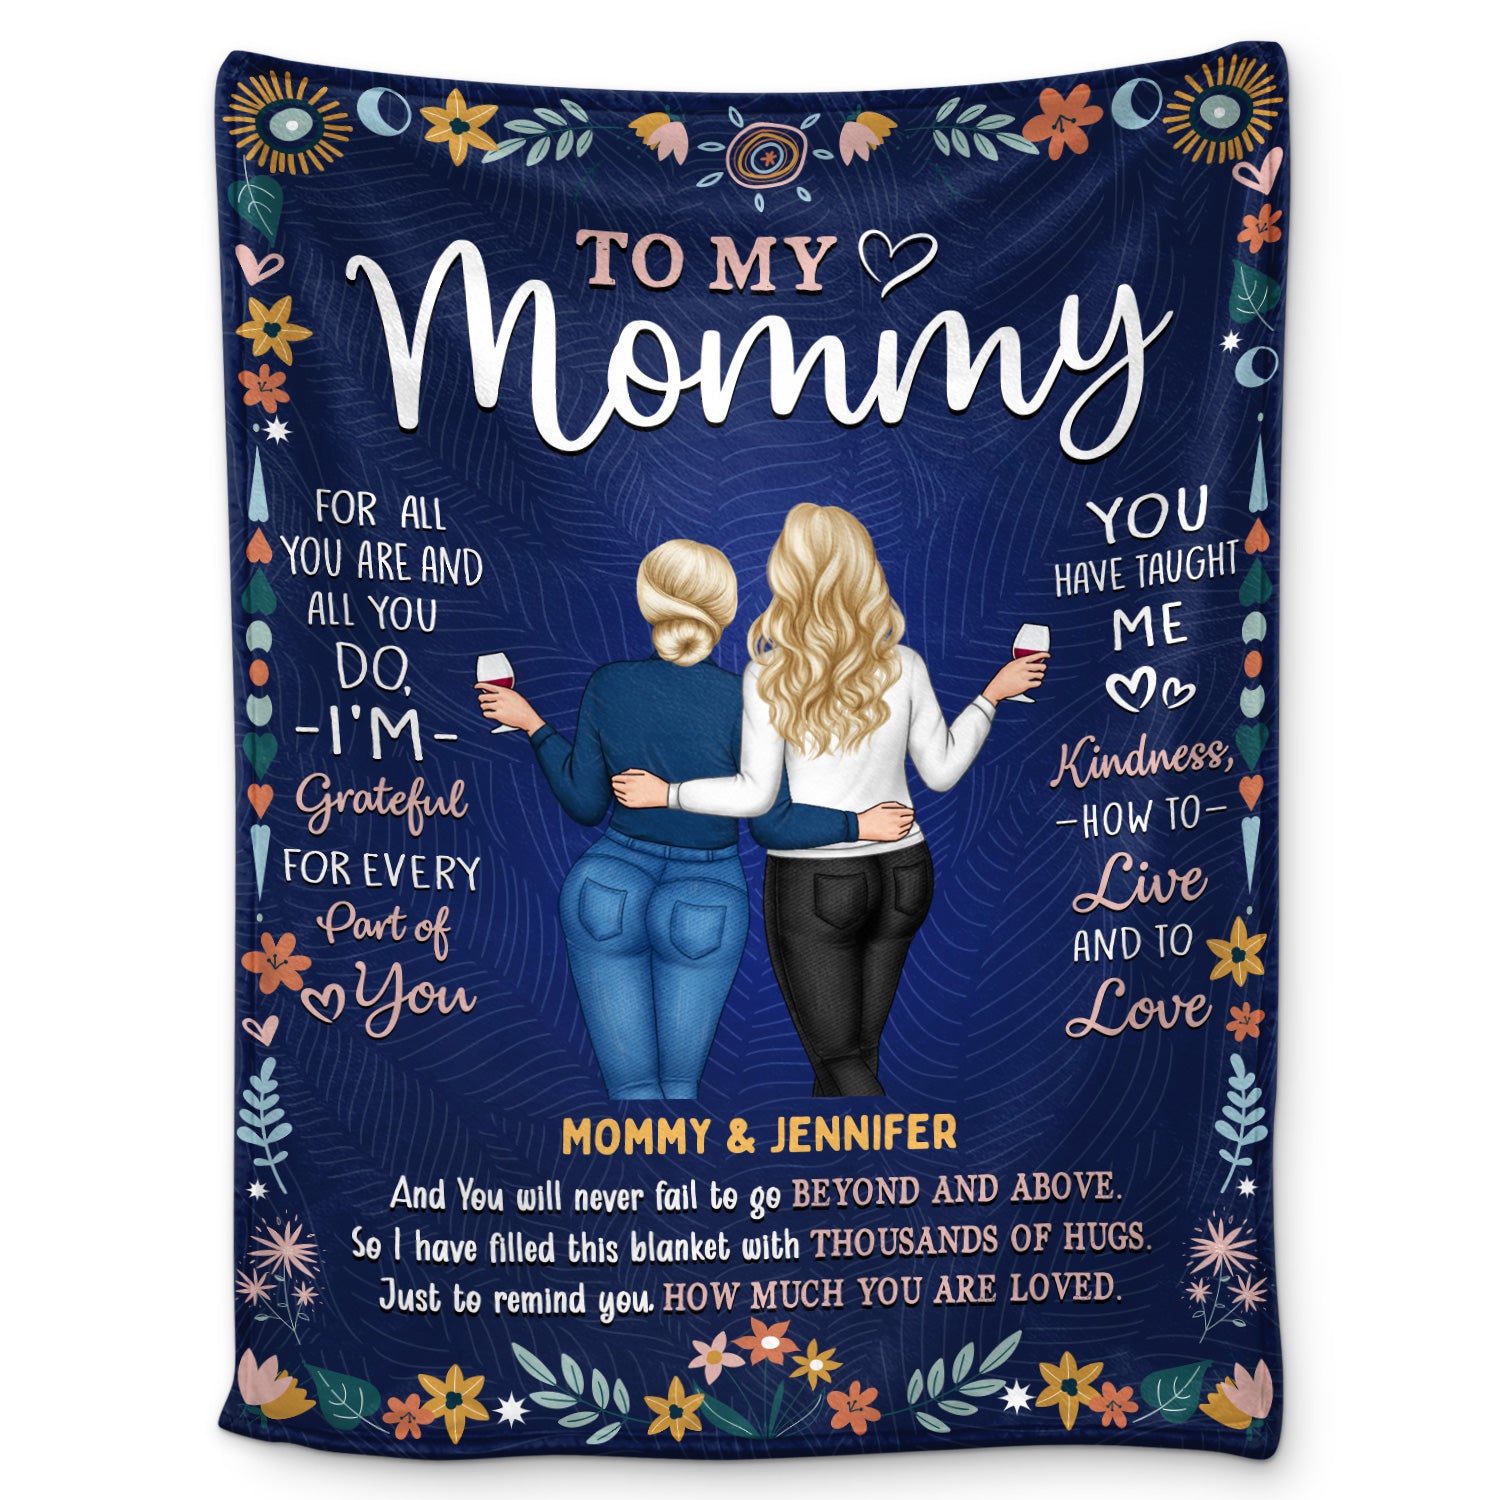 To My Mom - Gift For Mother - Personalized Fleece Blanket, Sherpa Blanket